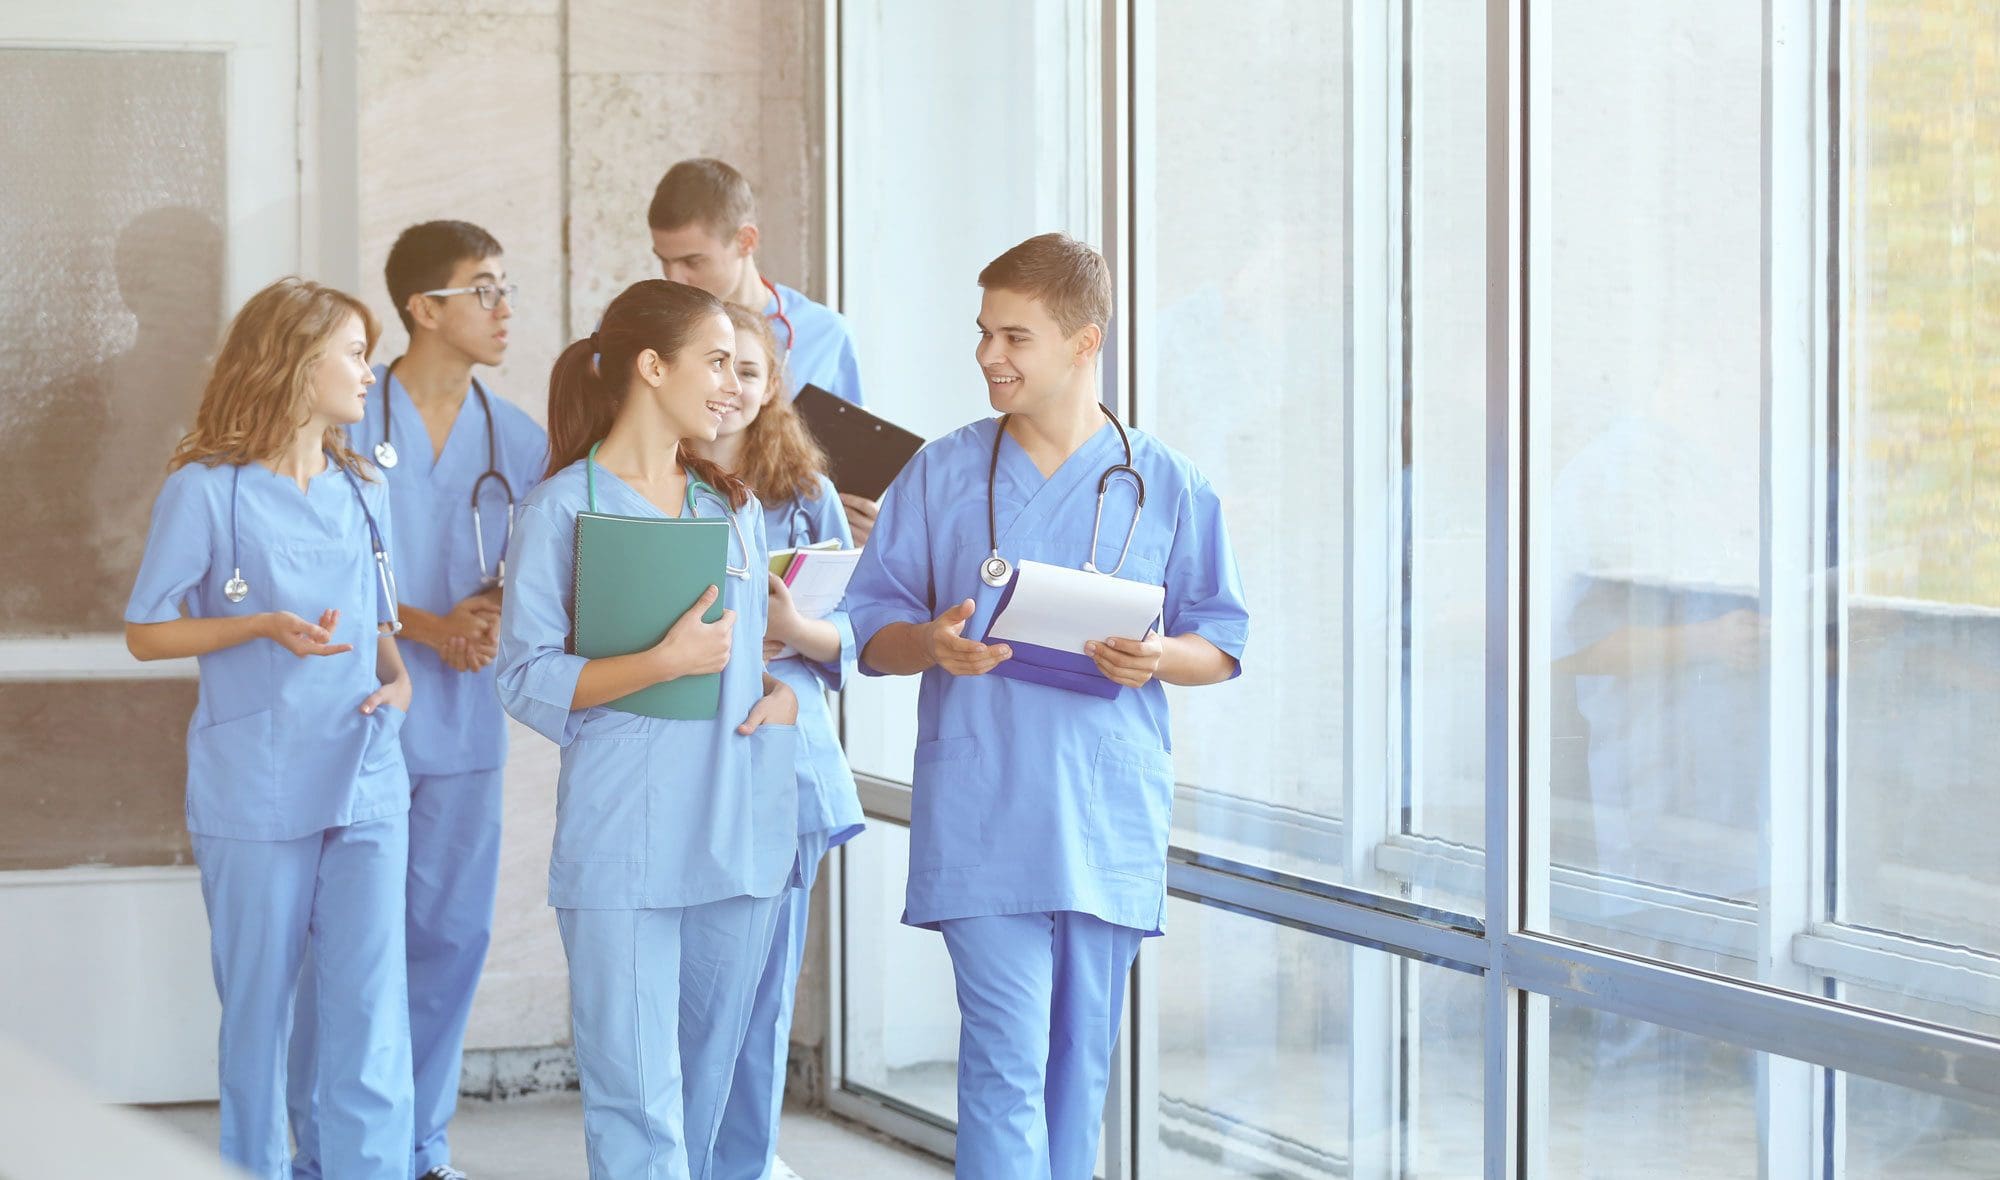 group of people in scrubs walking together